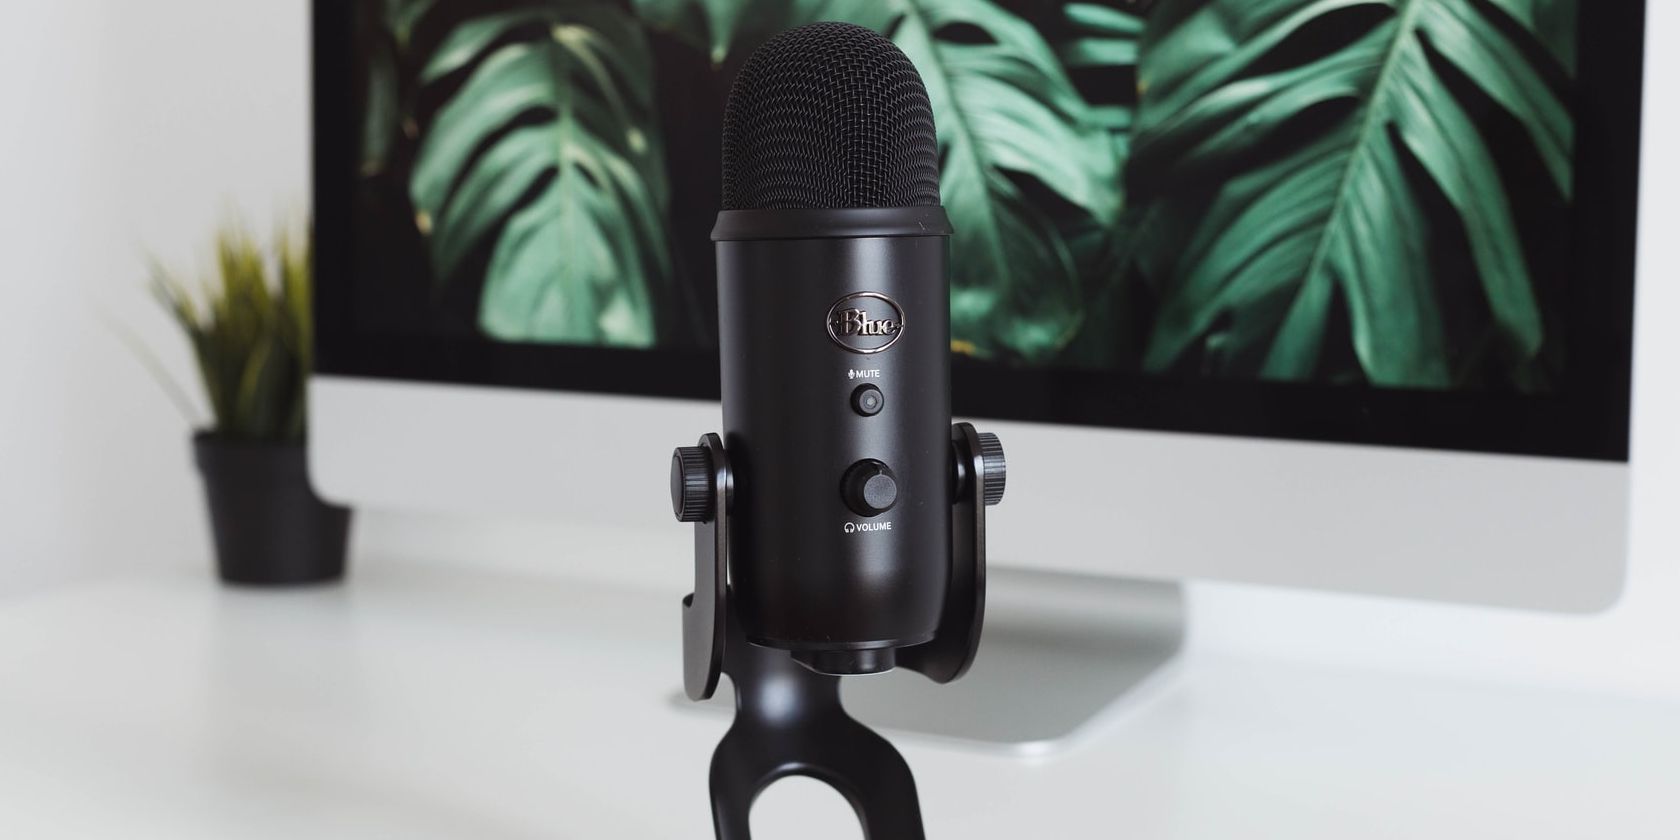 https://static1.makeuseofimages.com/wordpress/wp-content/uploads/2021/12/blue-yeti-featured-image-cropped.jpg